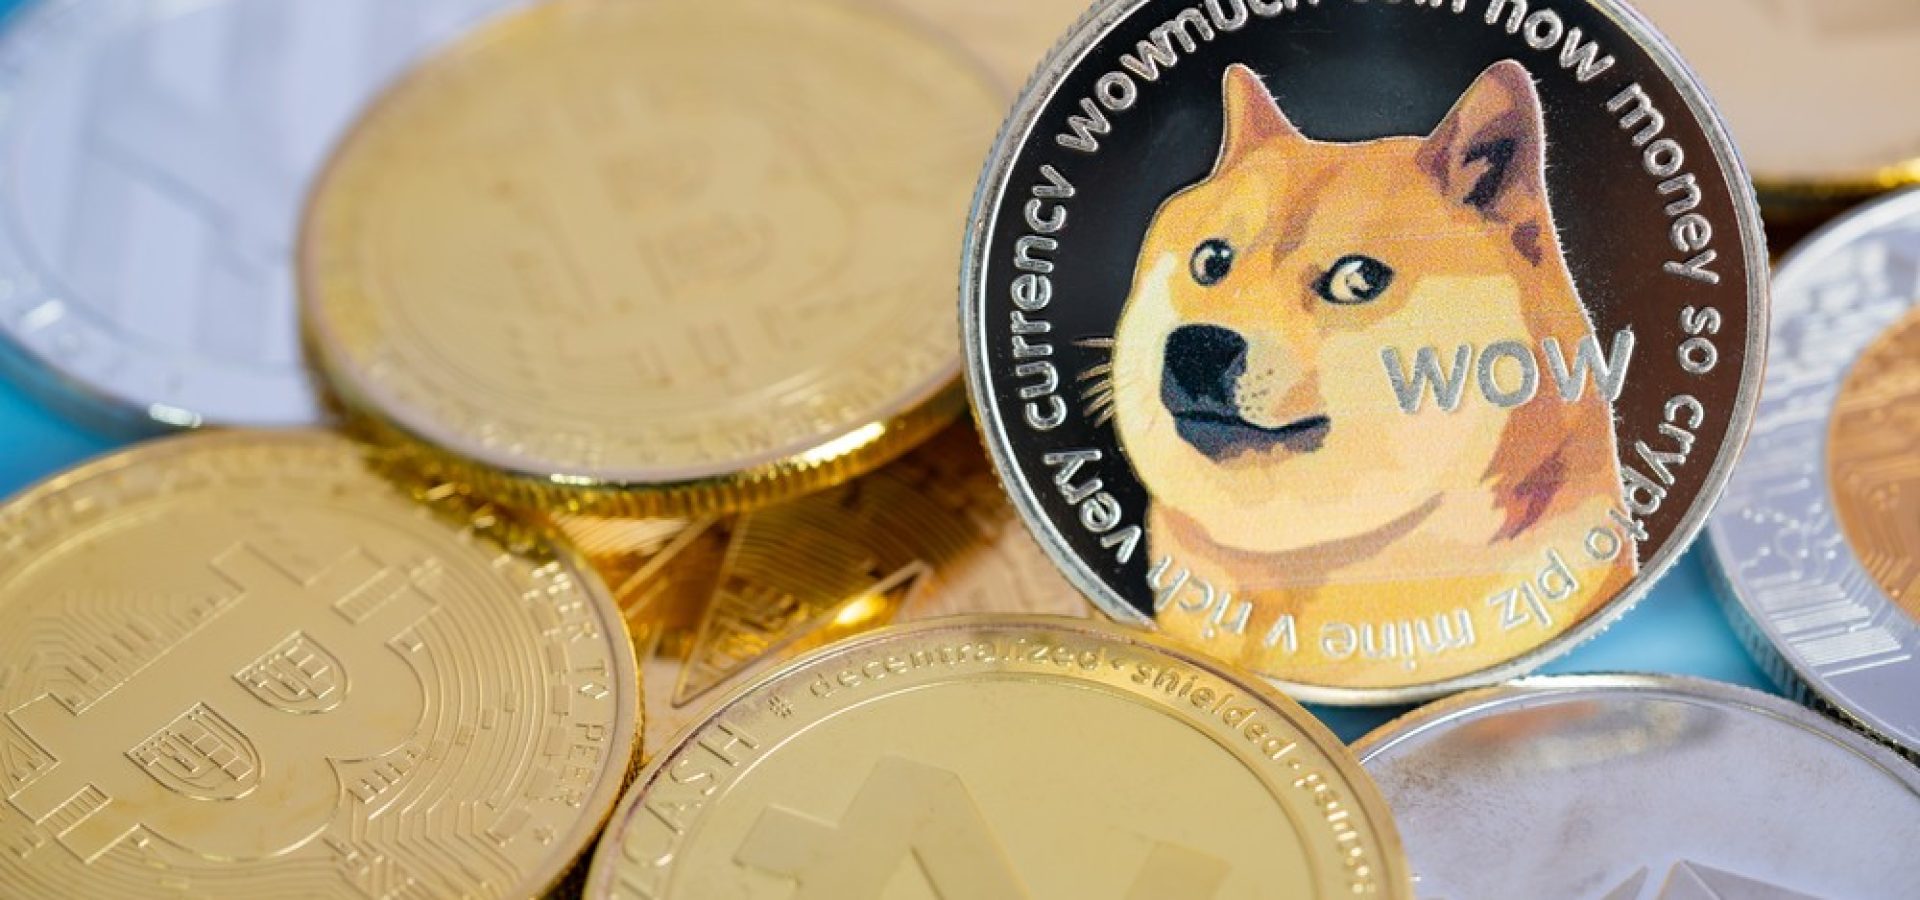 DOGE race car crashes while the coin drops sharply too